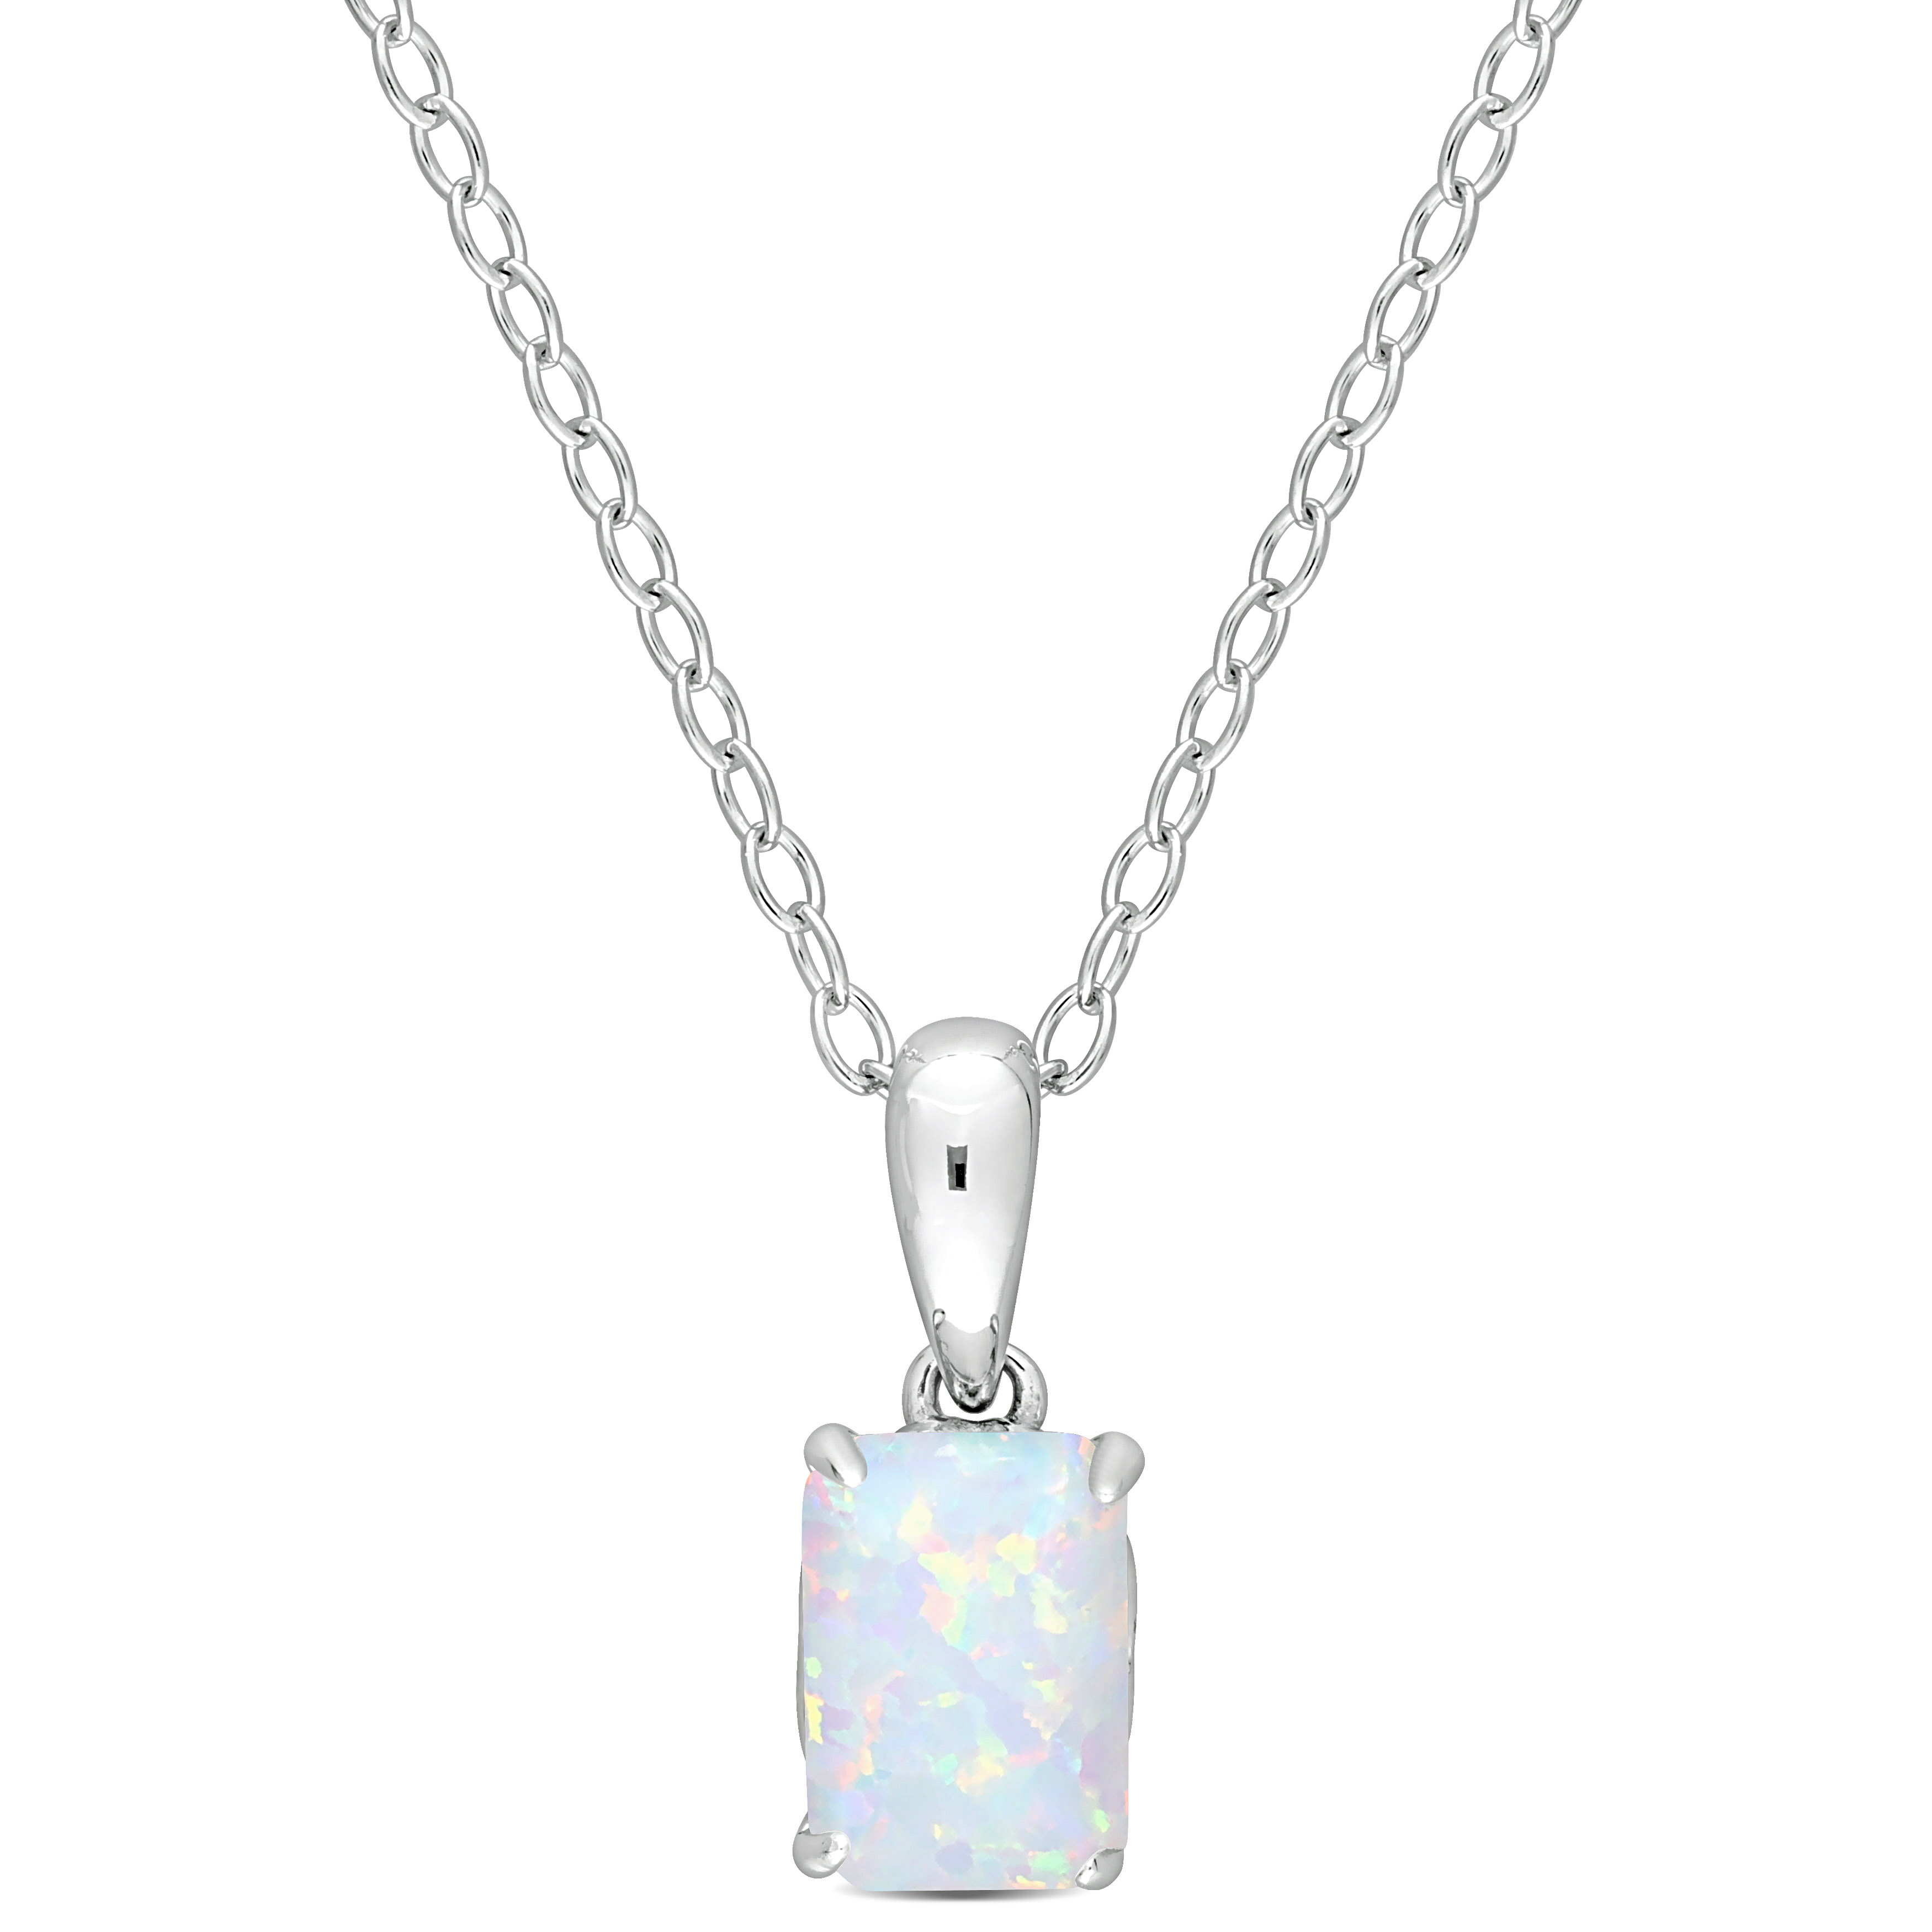 3/4 CT TGW Emerald Cut Created Opal Solitaire Heart Design Pendant with Chain in Sterling Silver - 18 in.